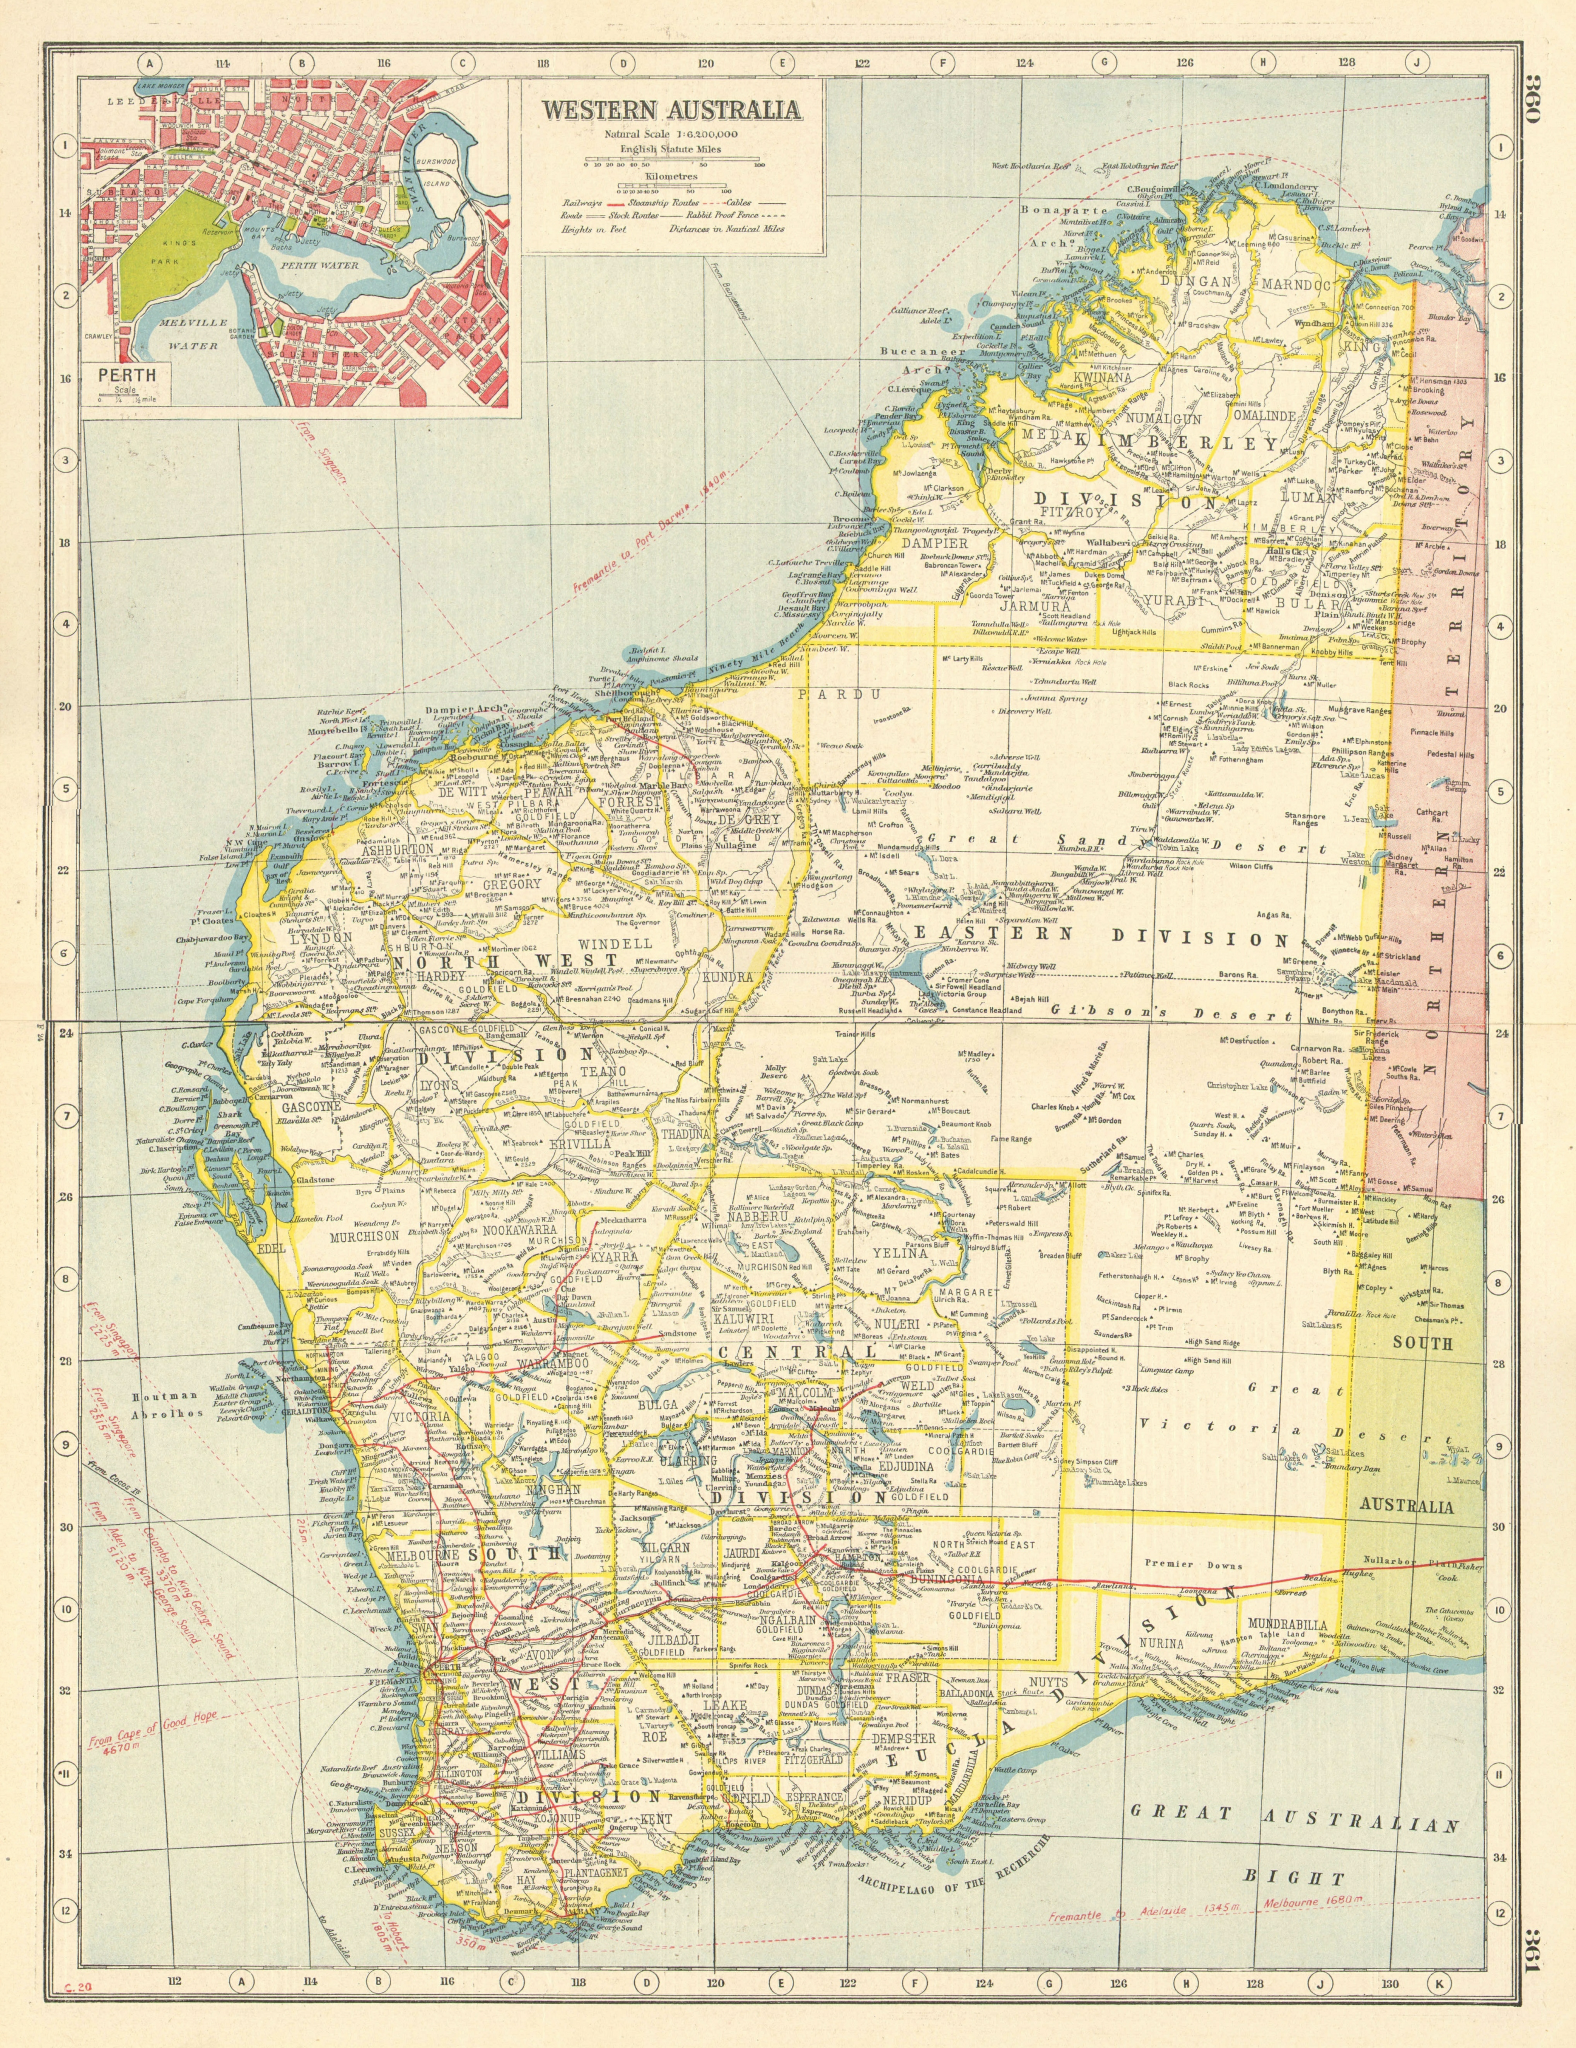 Associate Product WESTERN AUSTRALIA. Inset plan of Perth. HARMSWORTH 1920 old antique map chart